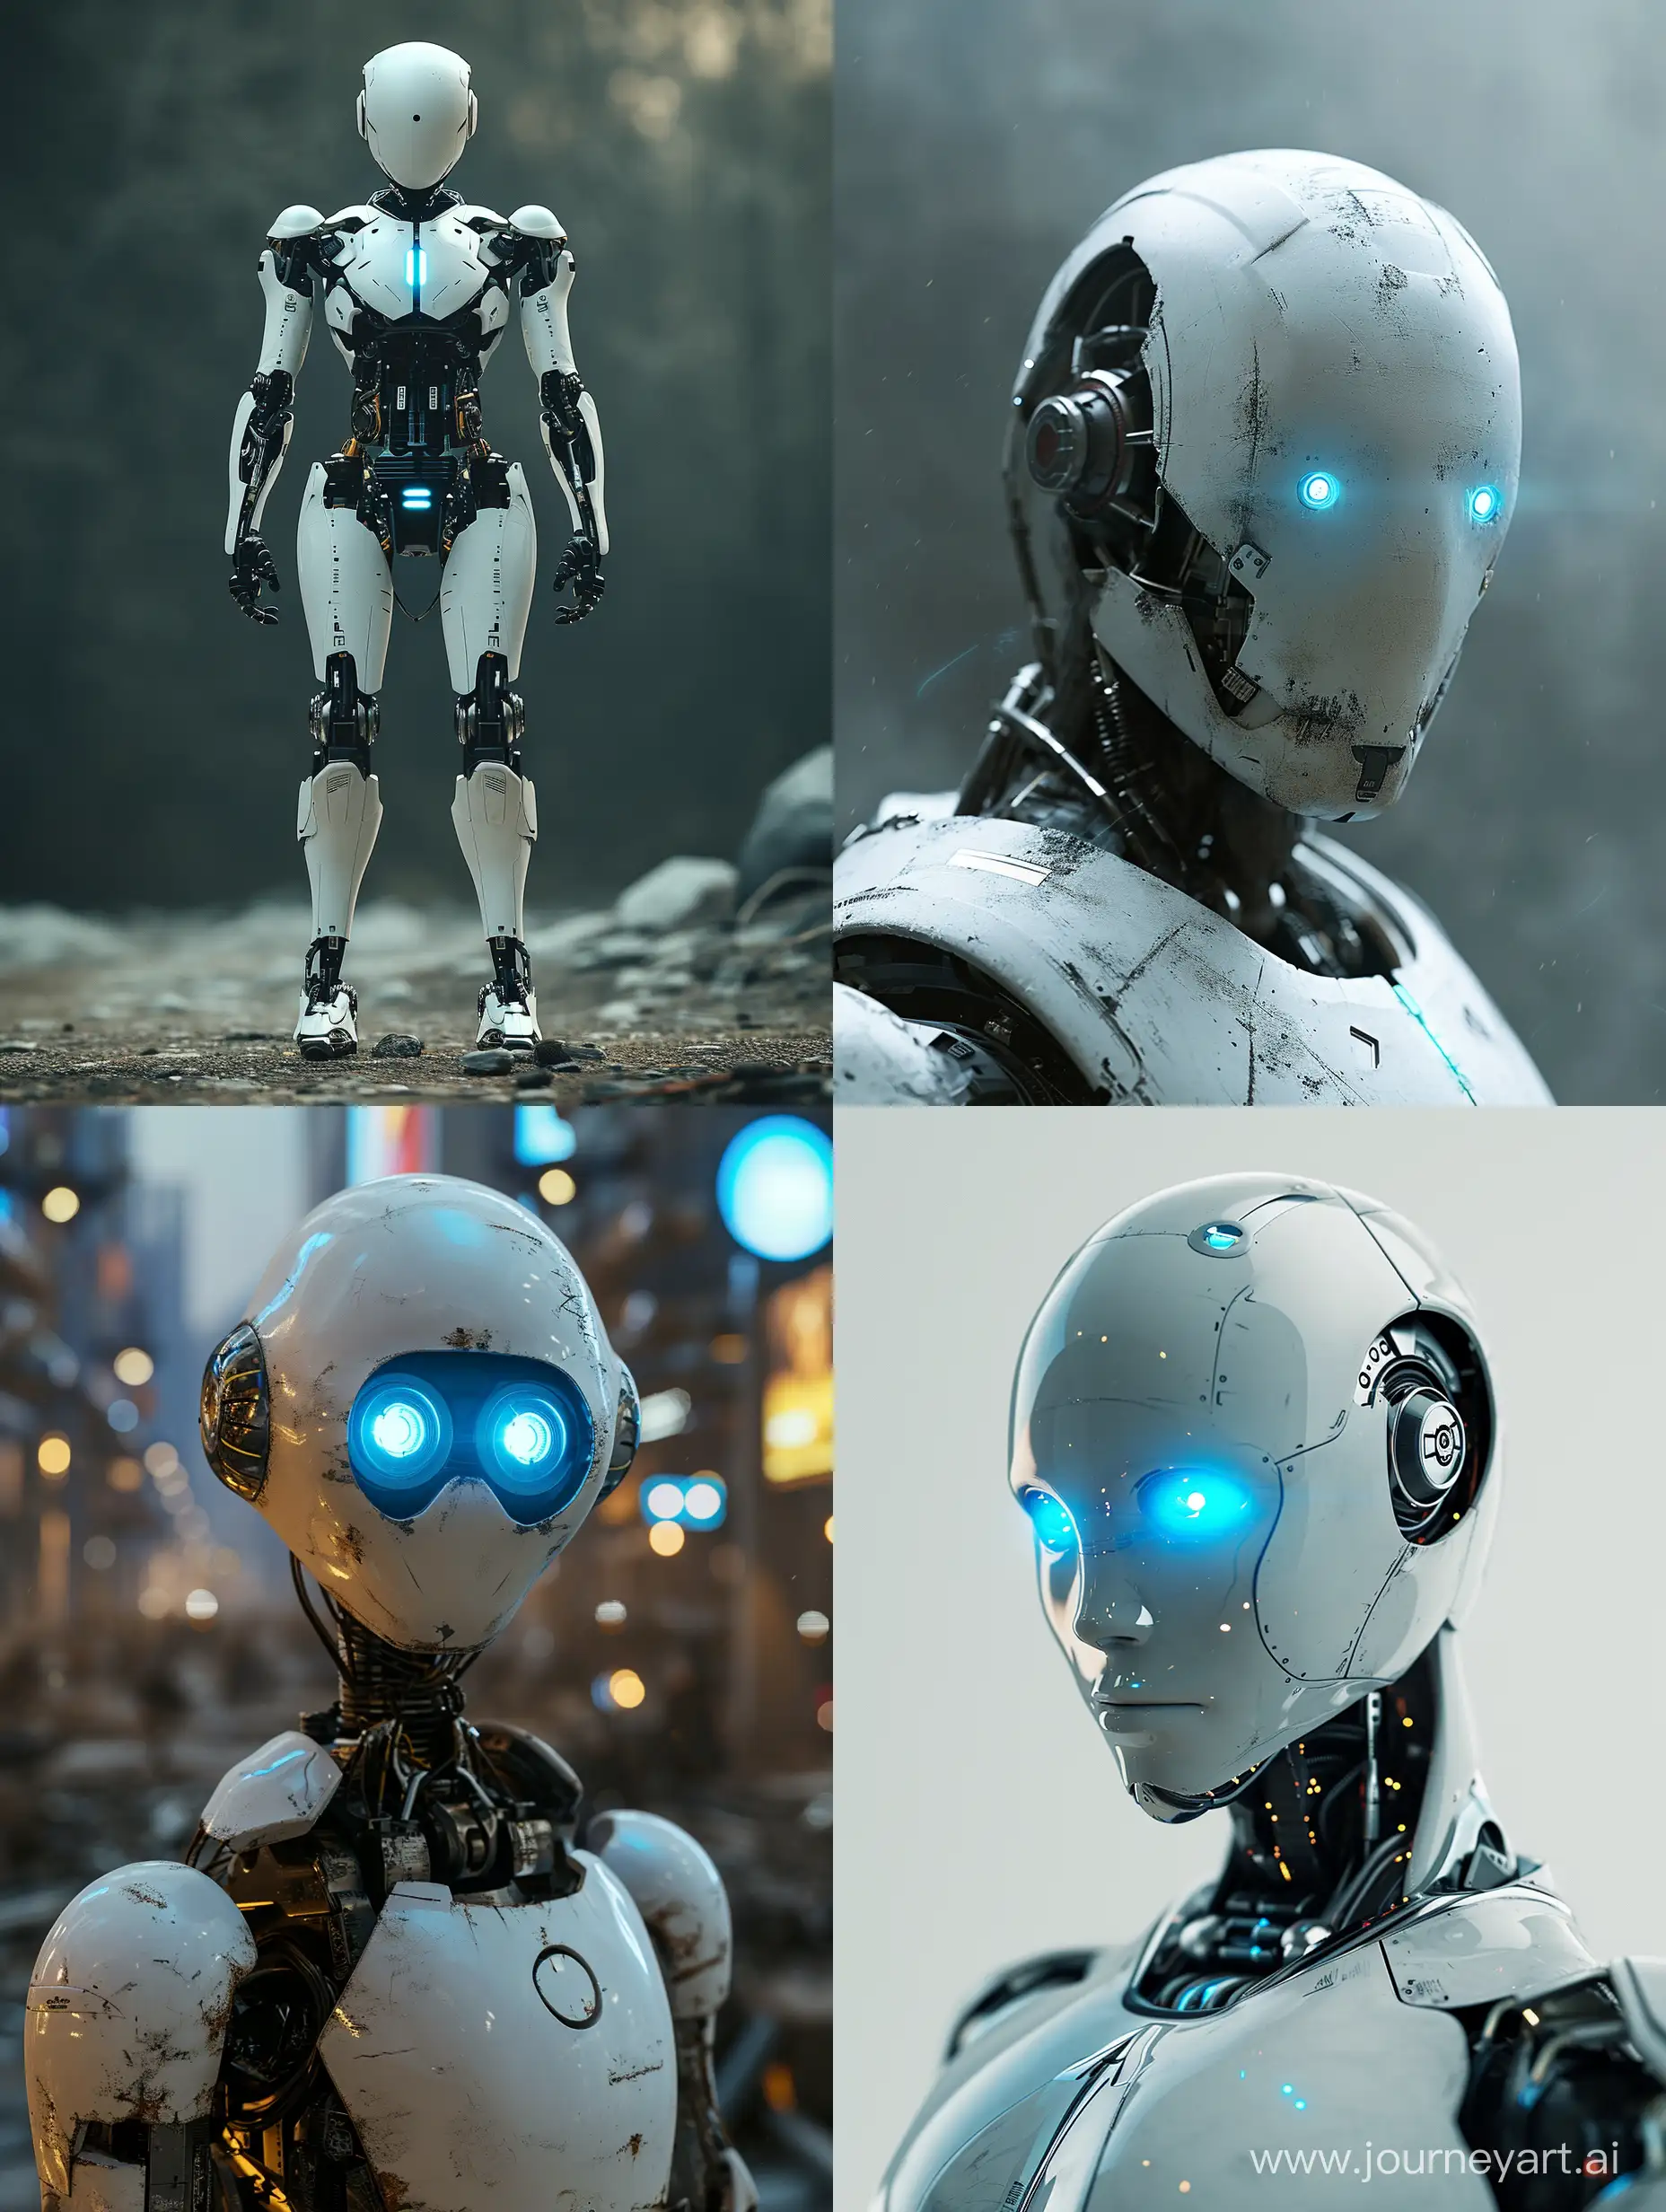 Glowing-BlueEyed-Robot-Standing-Tall-in-8K-VRay-Rendering